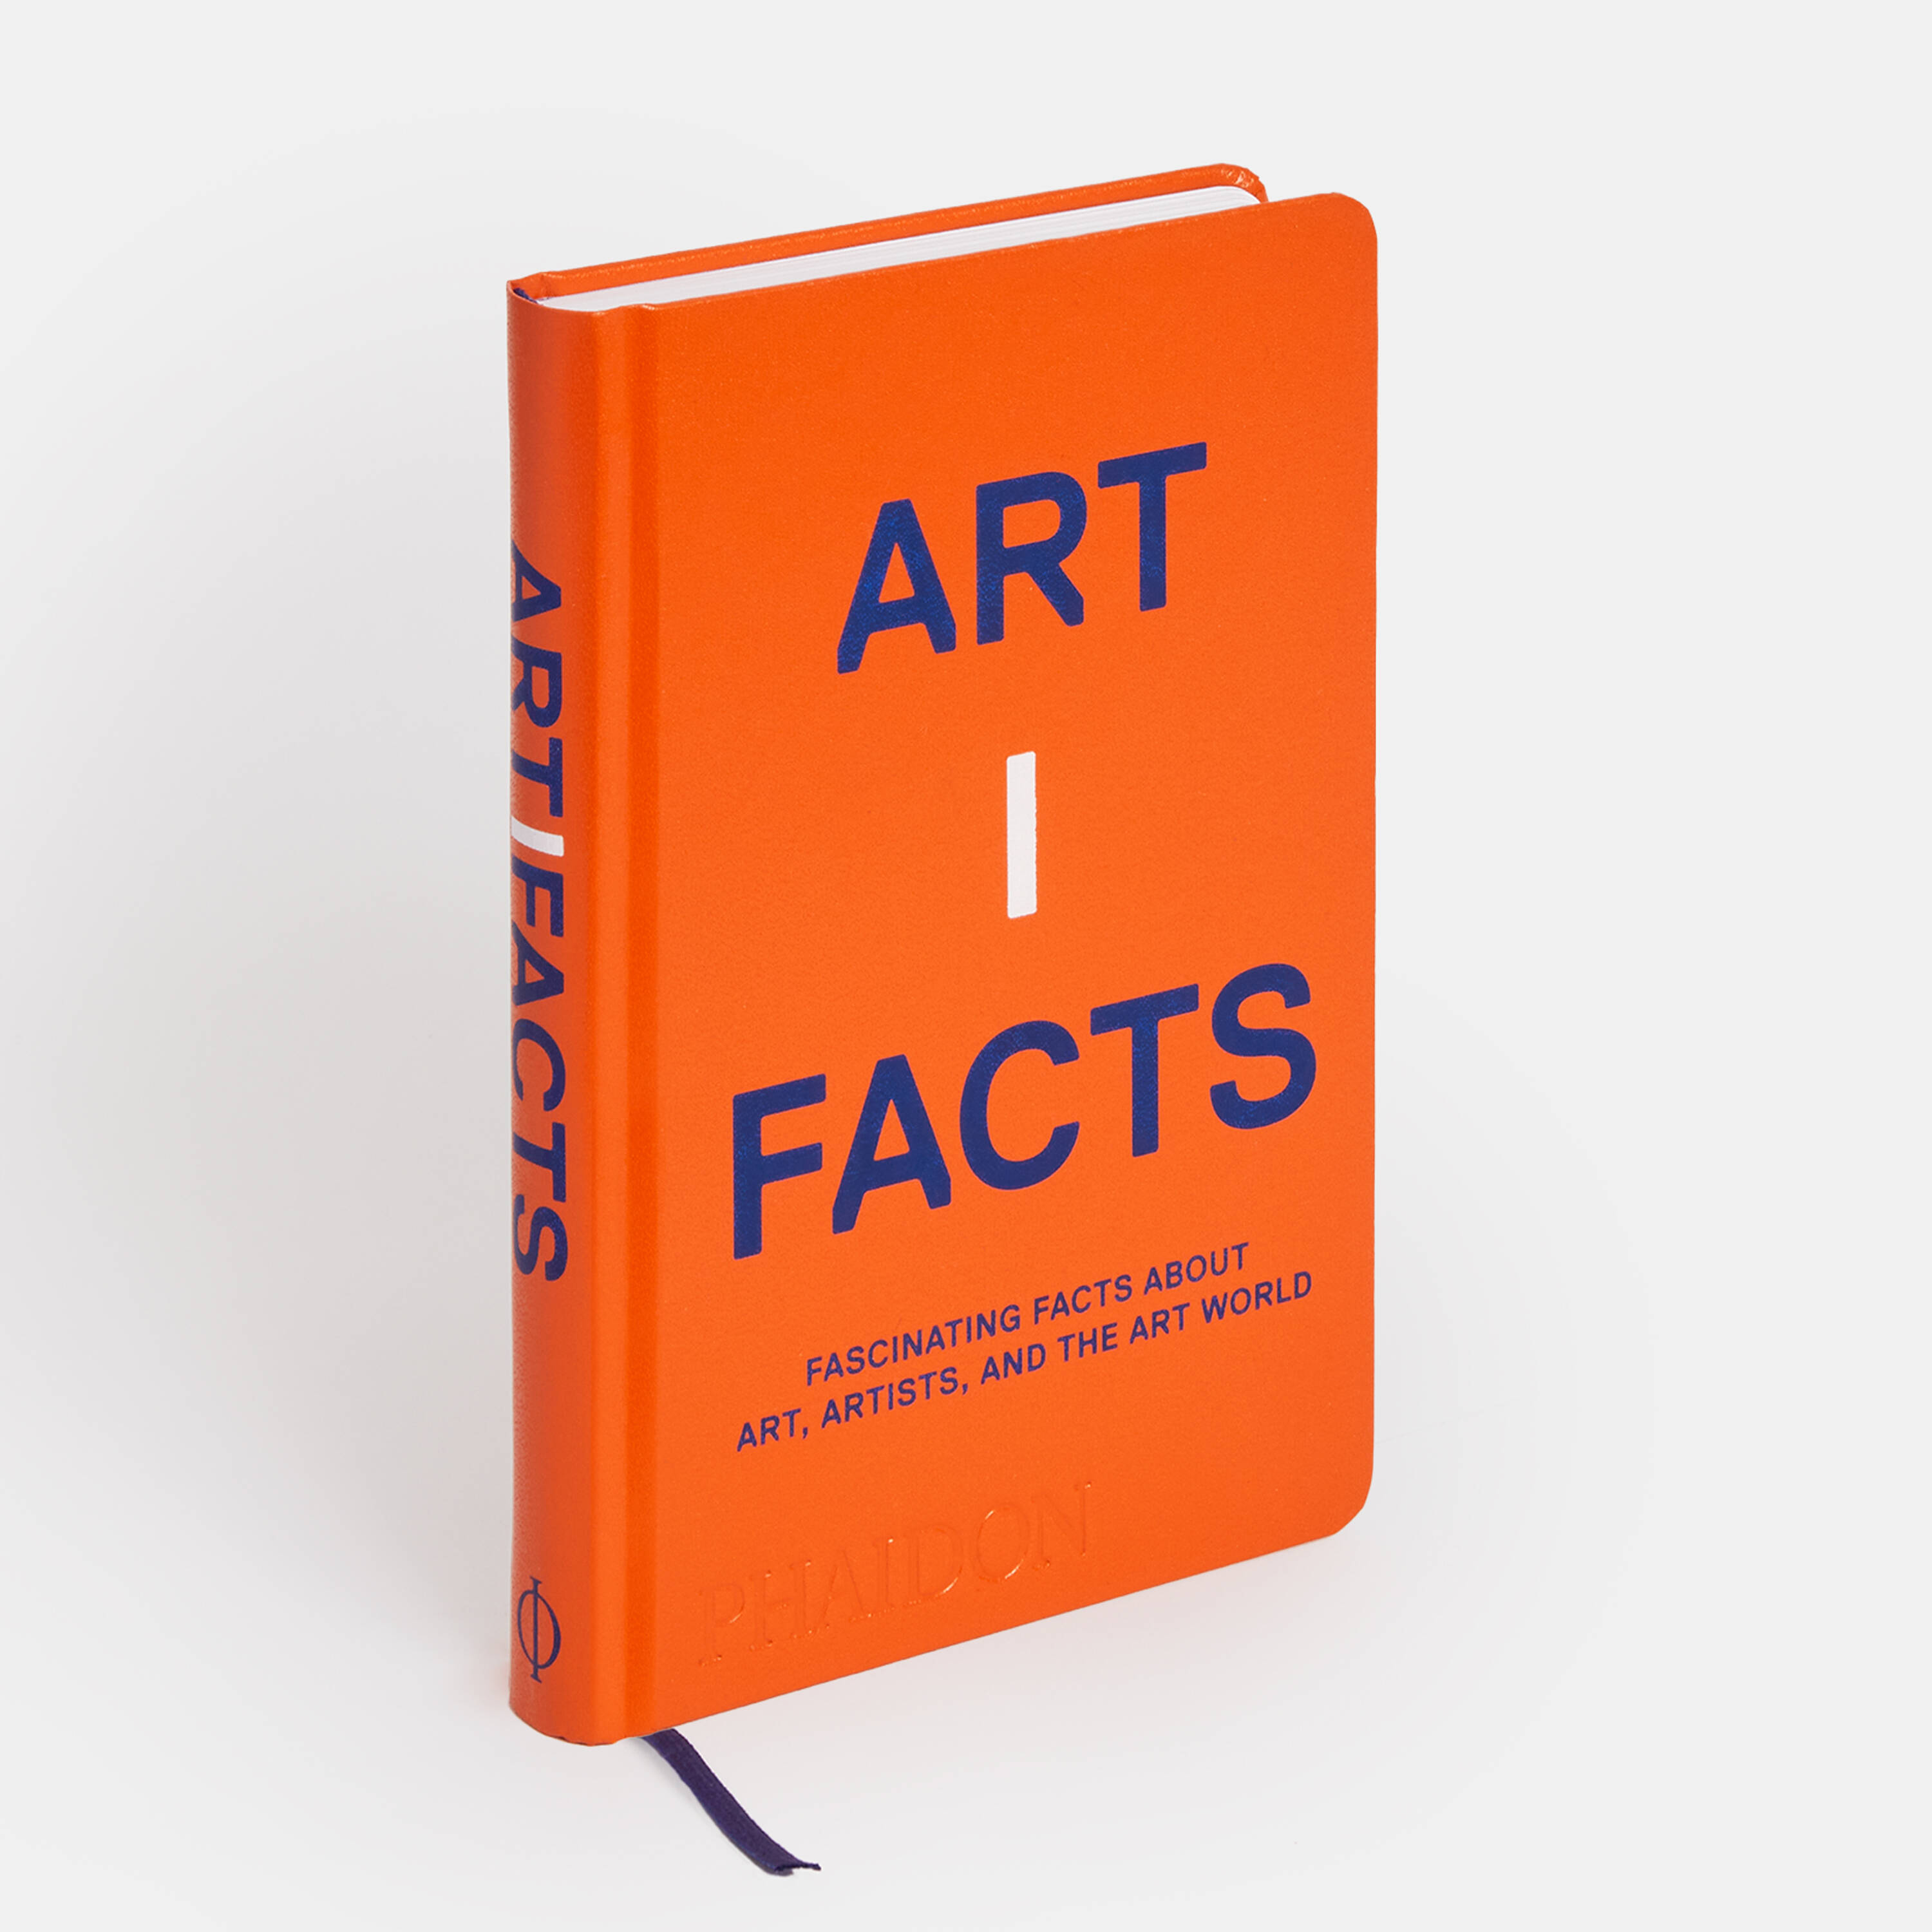 Are you doing galleries the wrong way? Our new book Artifacts has some surprising insights